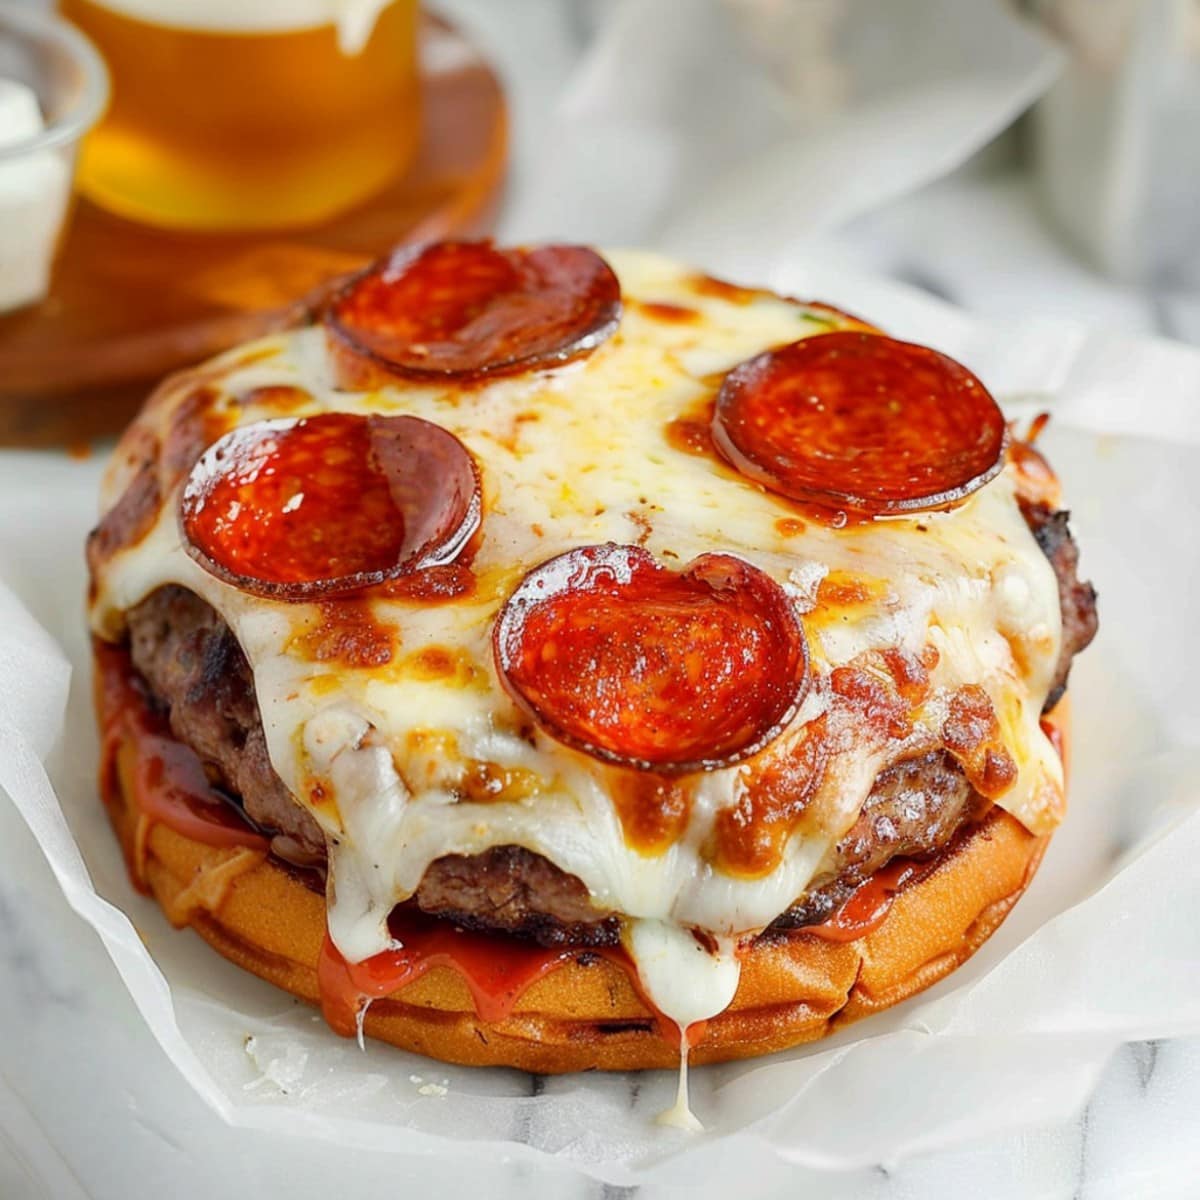 Cheesy pizza burgers stuffed with gooey mozzarella and topped pepperoni slices